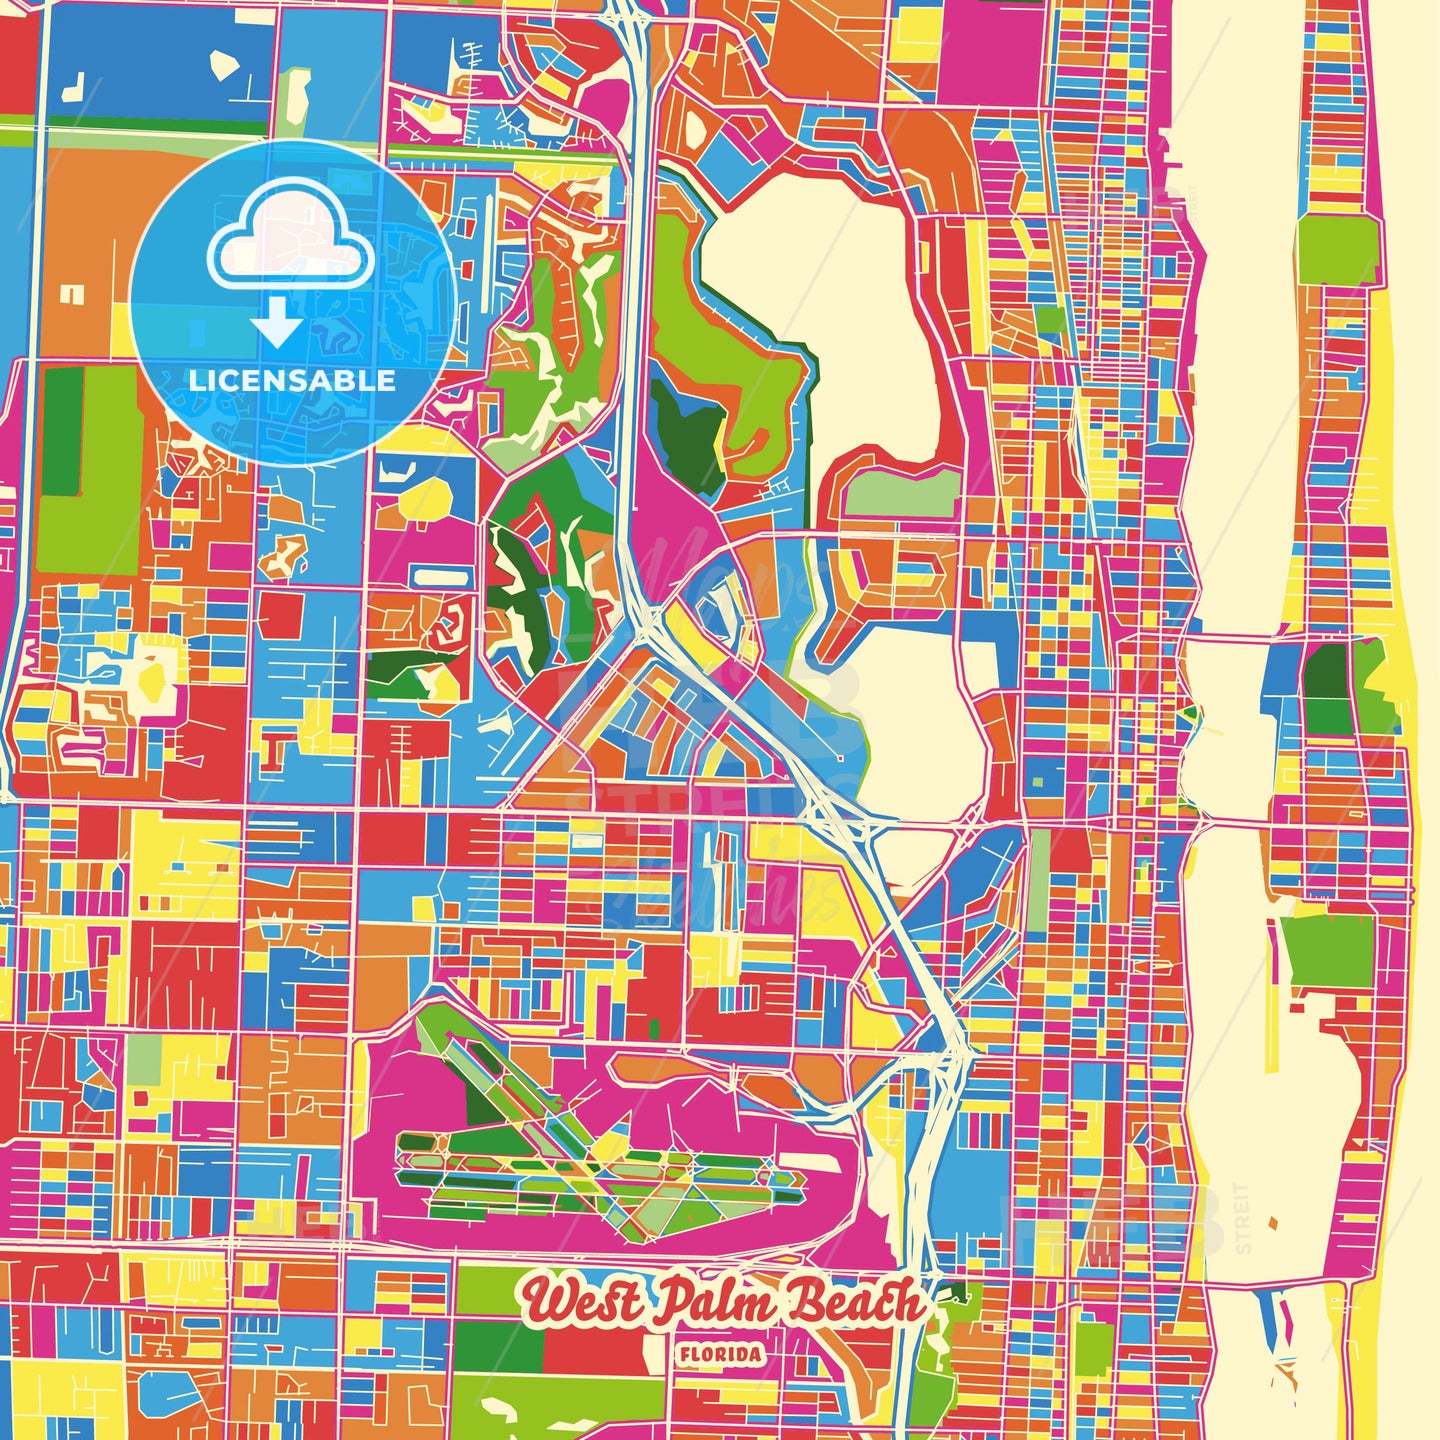 West Palm Beach, United States Crazy Colorful Street Map Poster Template - HEBSTREITS Sketches